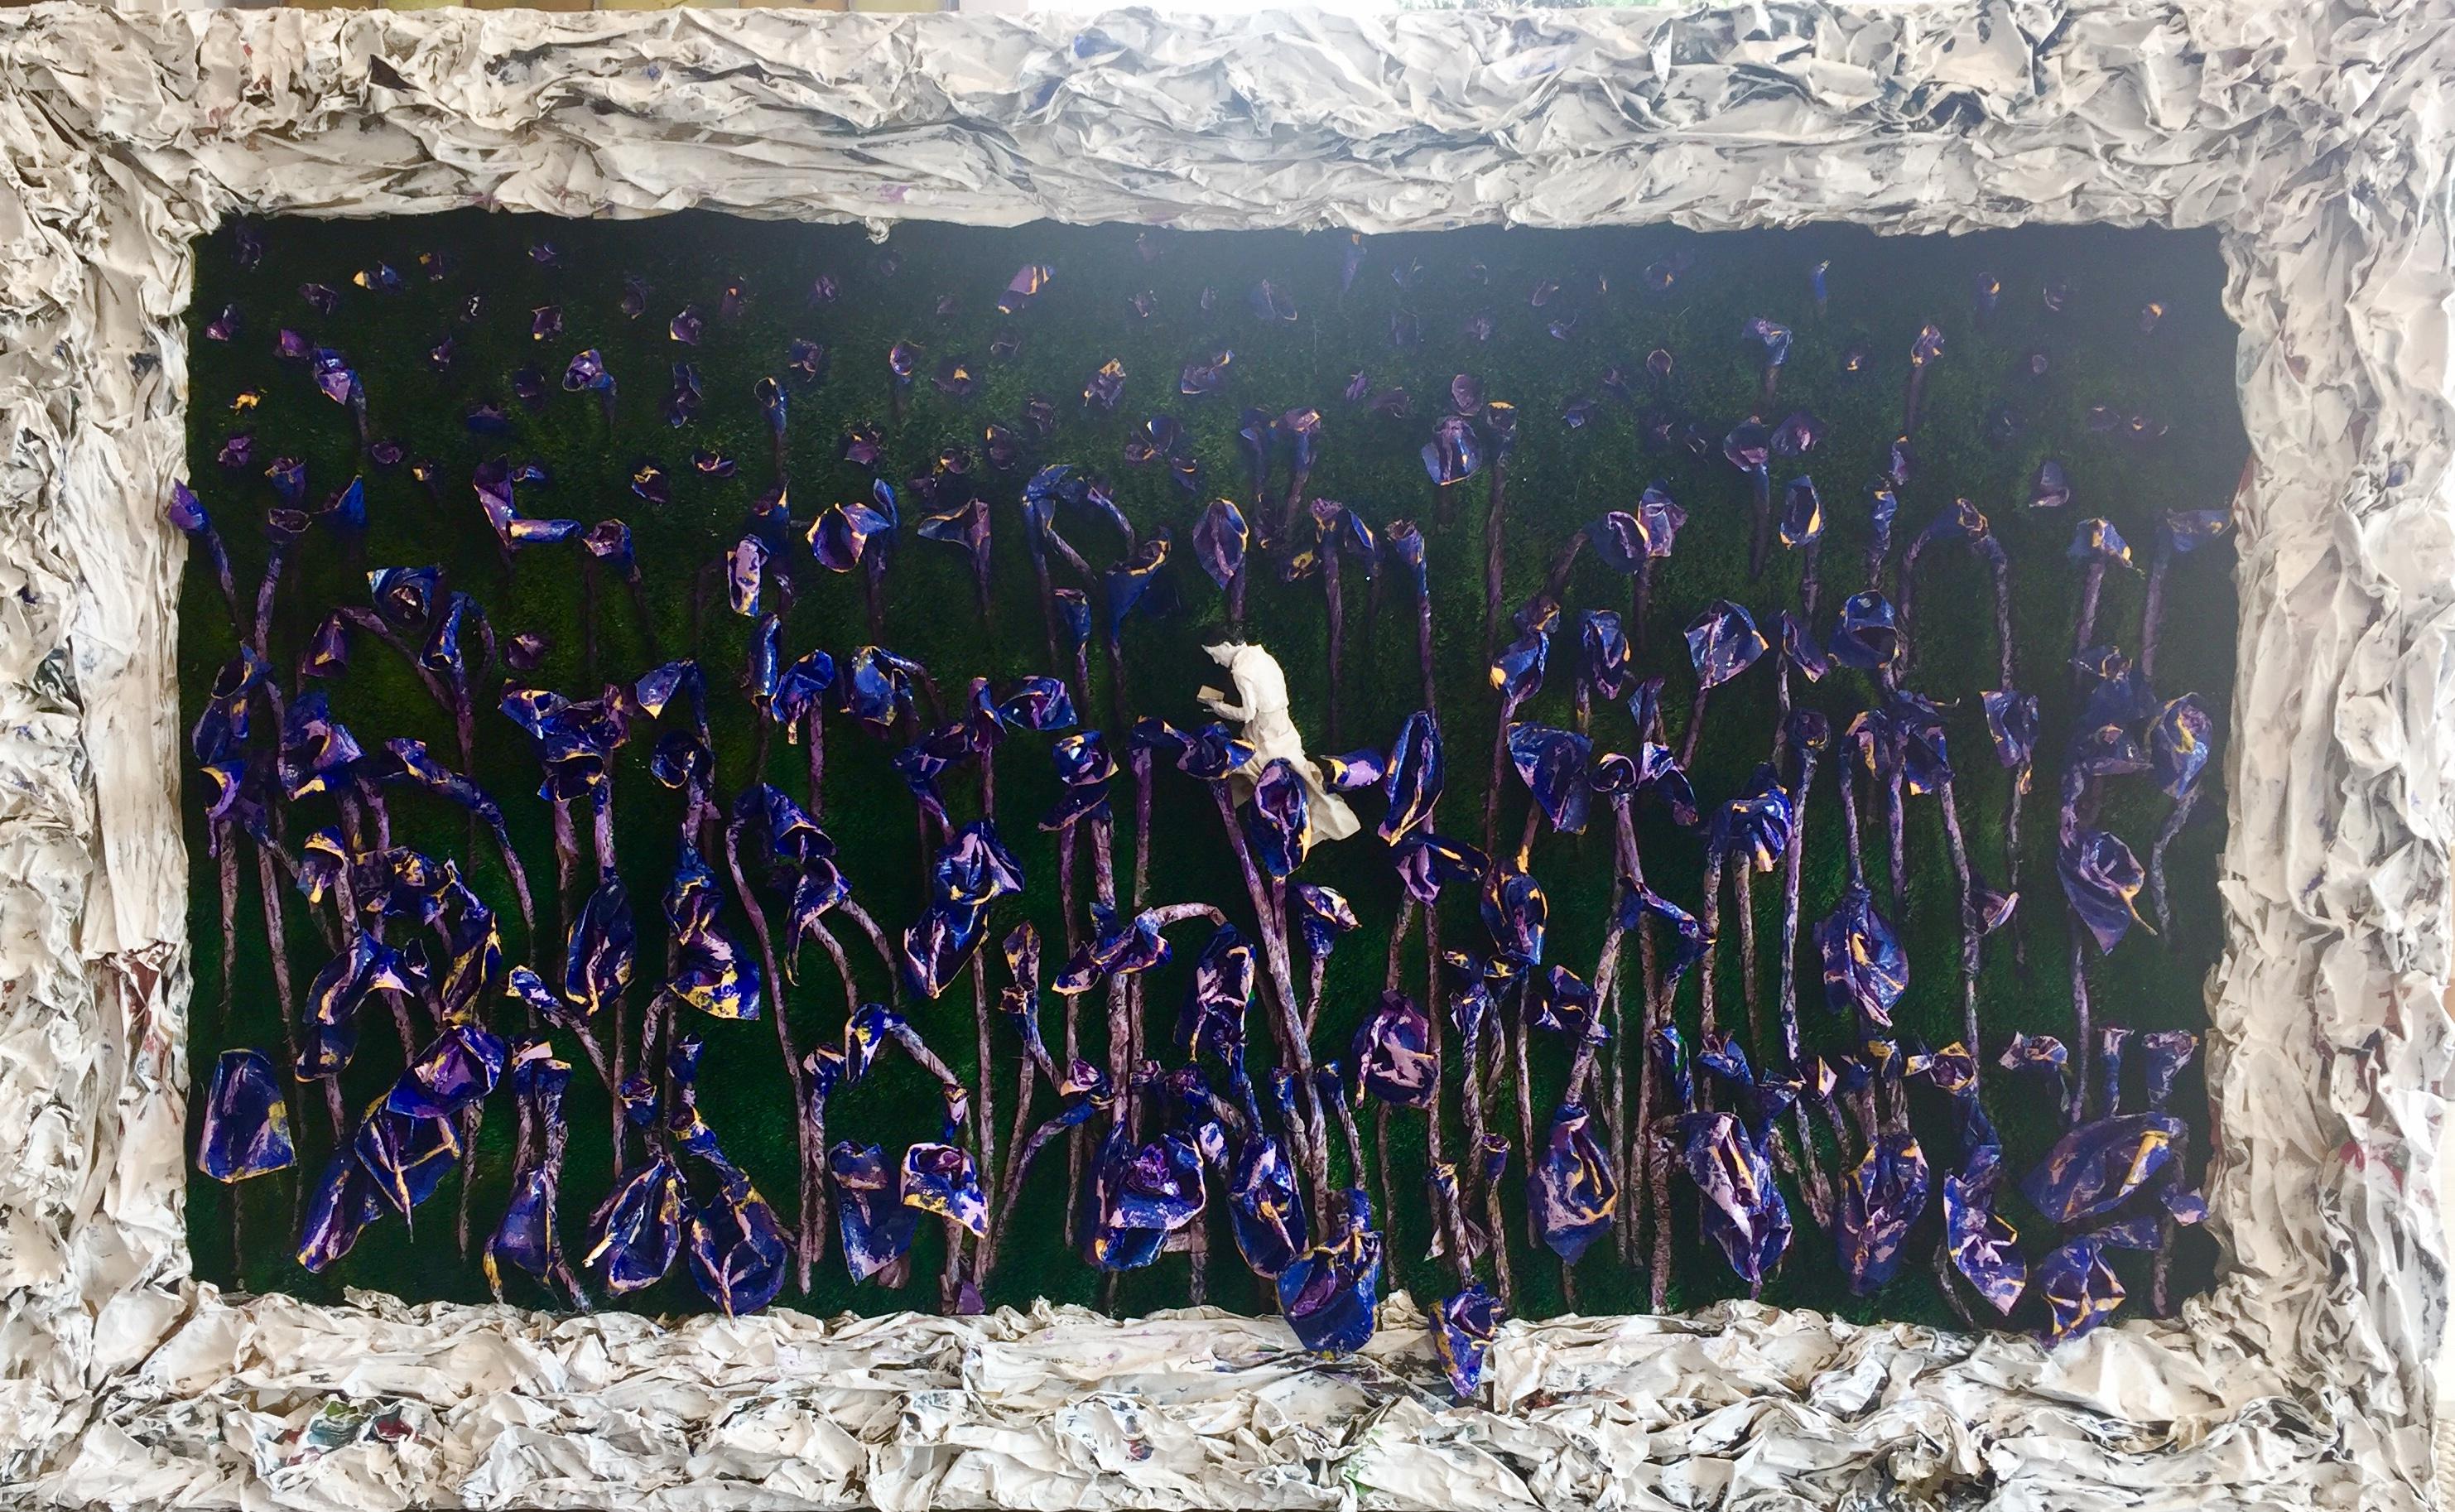 My Letter to the World (Large 3D Purple Irises, Woman Reading among Flowers) - Mixed Media Art by Olga Andrino